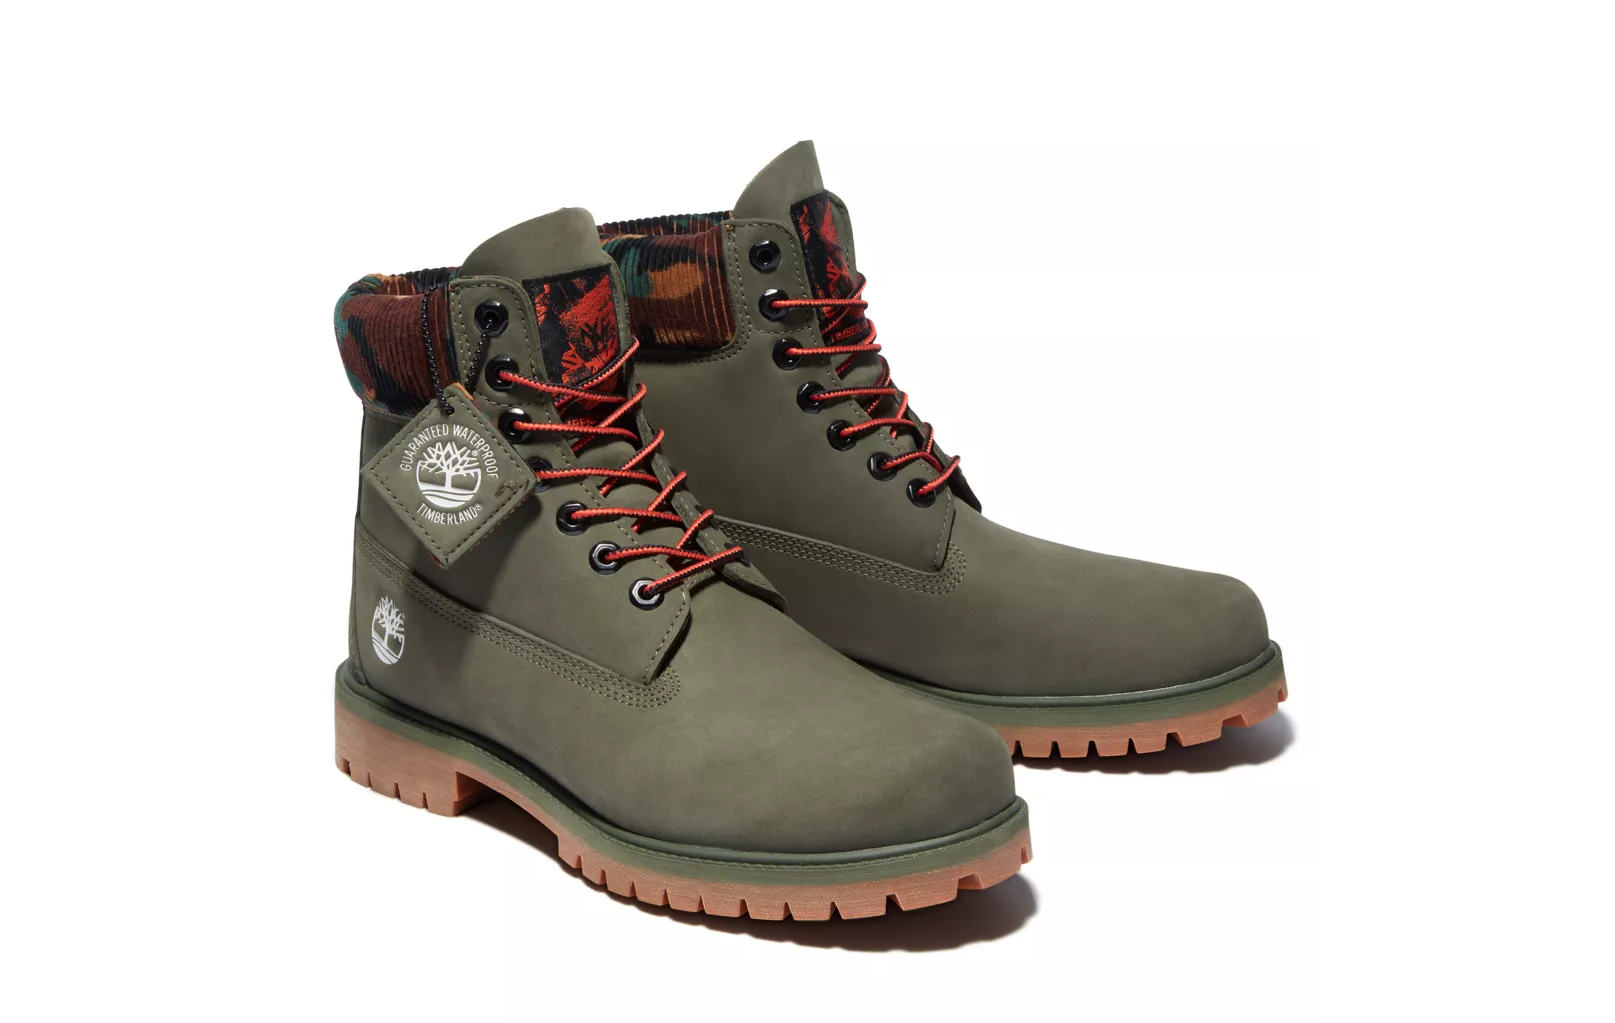 Timberland Boots With Camouflage | vlr.eng.br